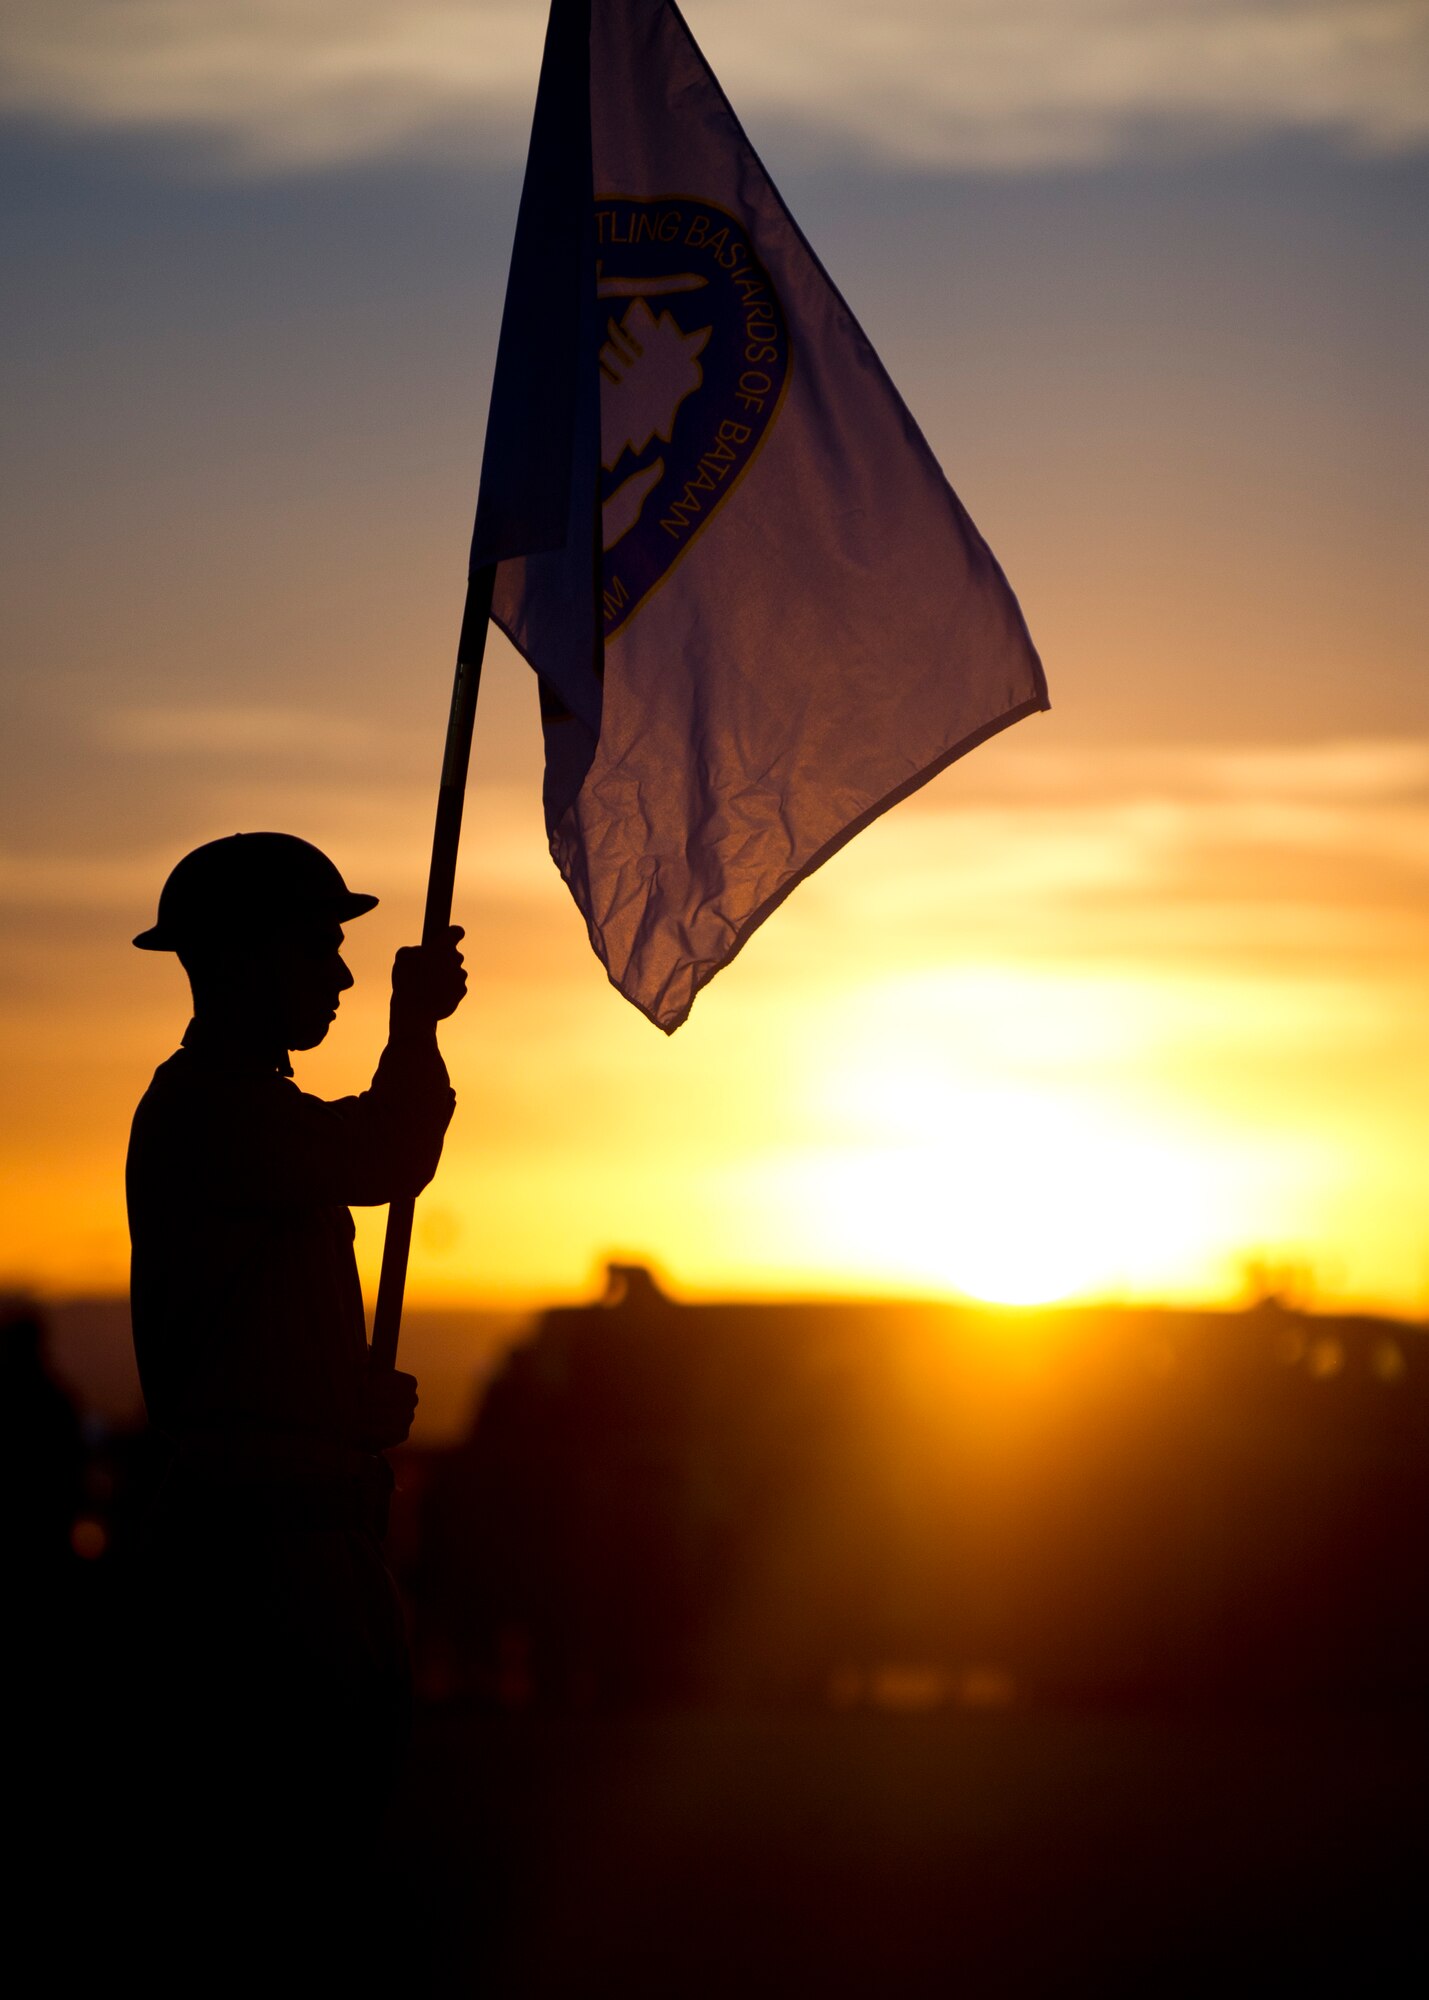 WHITE SANDS MISSILE RANGE, N.M. – A U.S. Army member posts the flag of the Battling Bastards of Bataan at the opening ceremony of the Bataan Memorial Death March here March 25. This was the 23rd annual Bataan Memorial Death March. (U.S. Air Force photo by Airman 1st Class Daniel E. Liddicoet/Released)